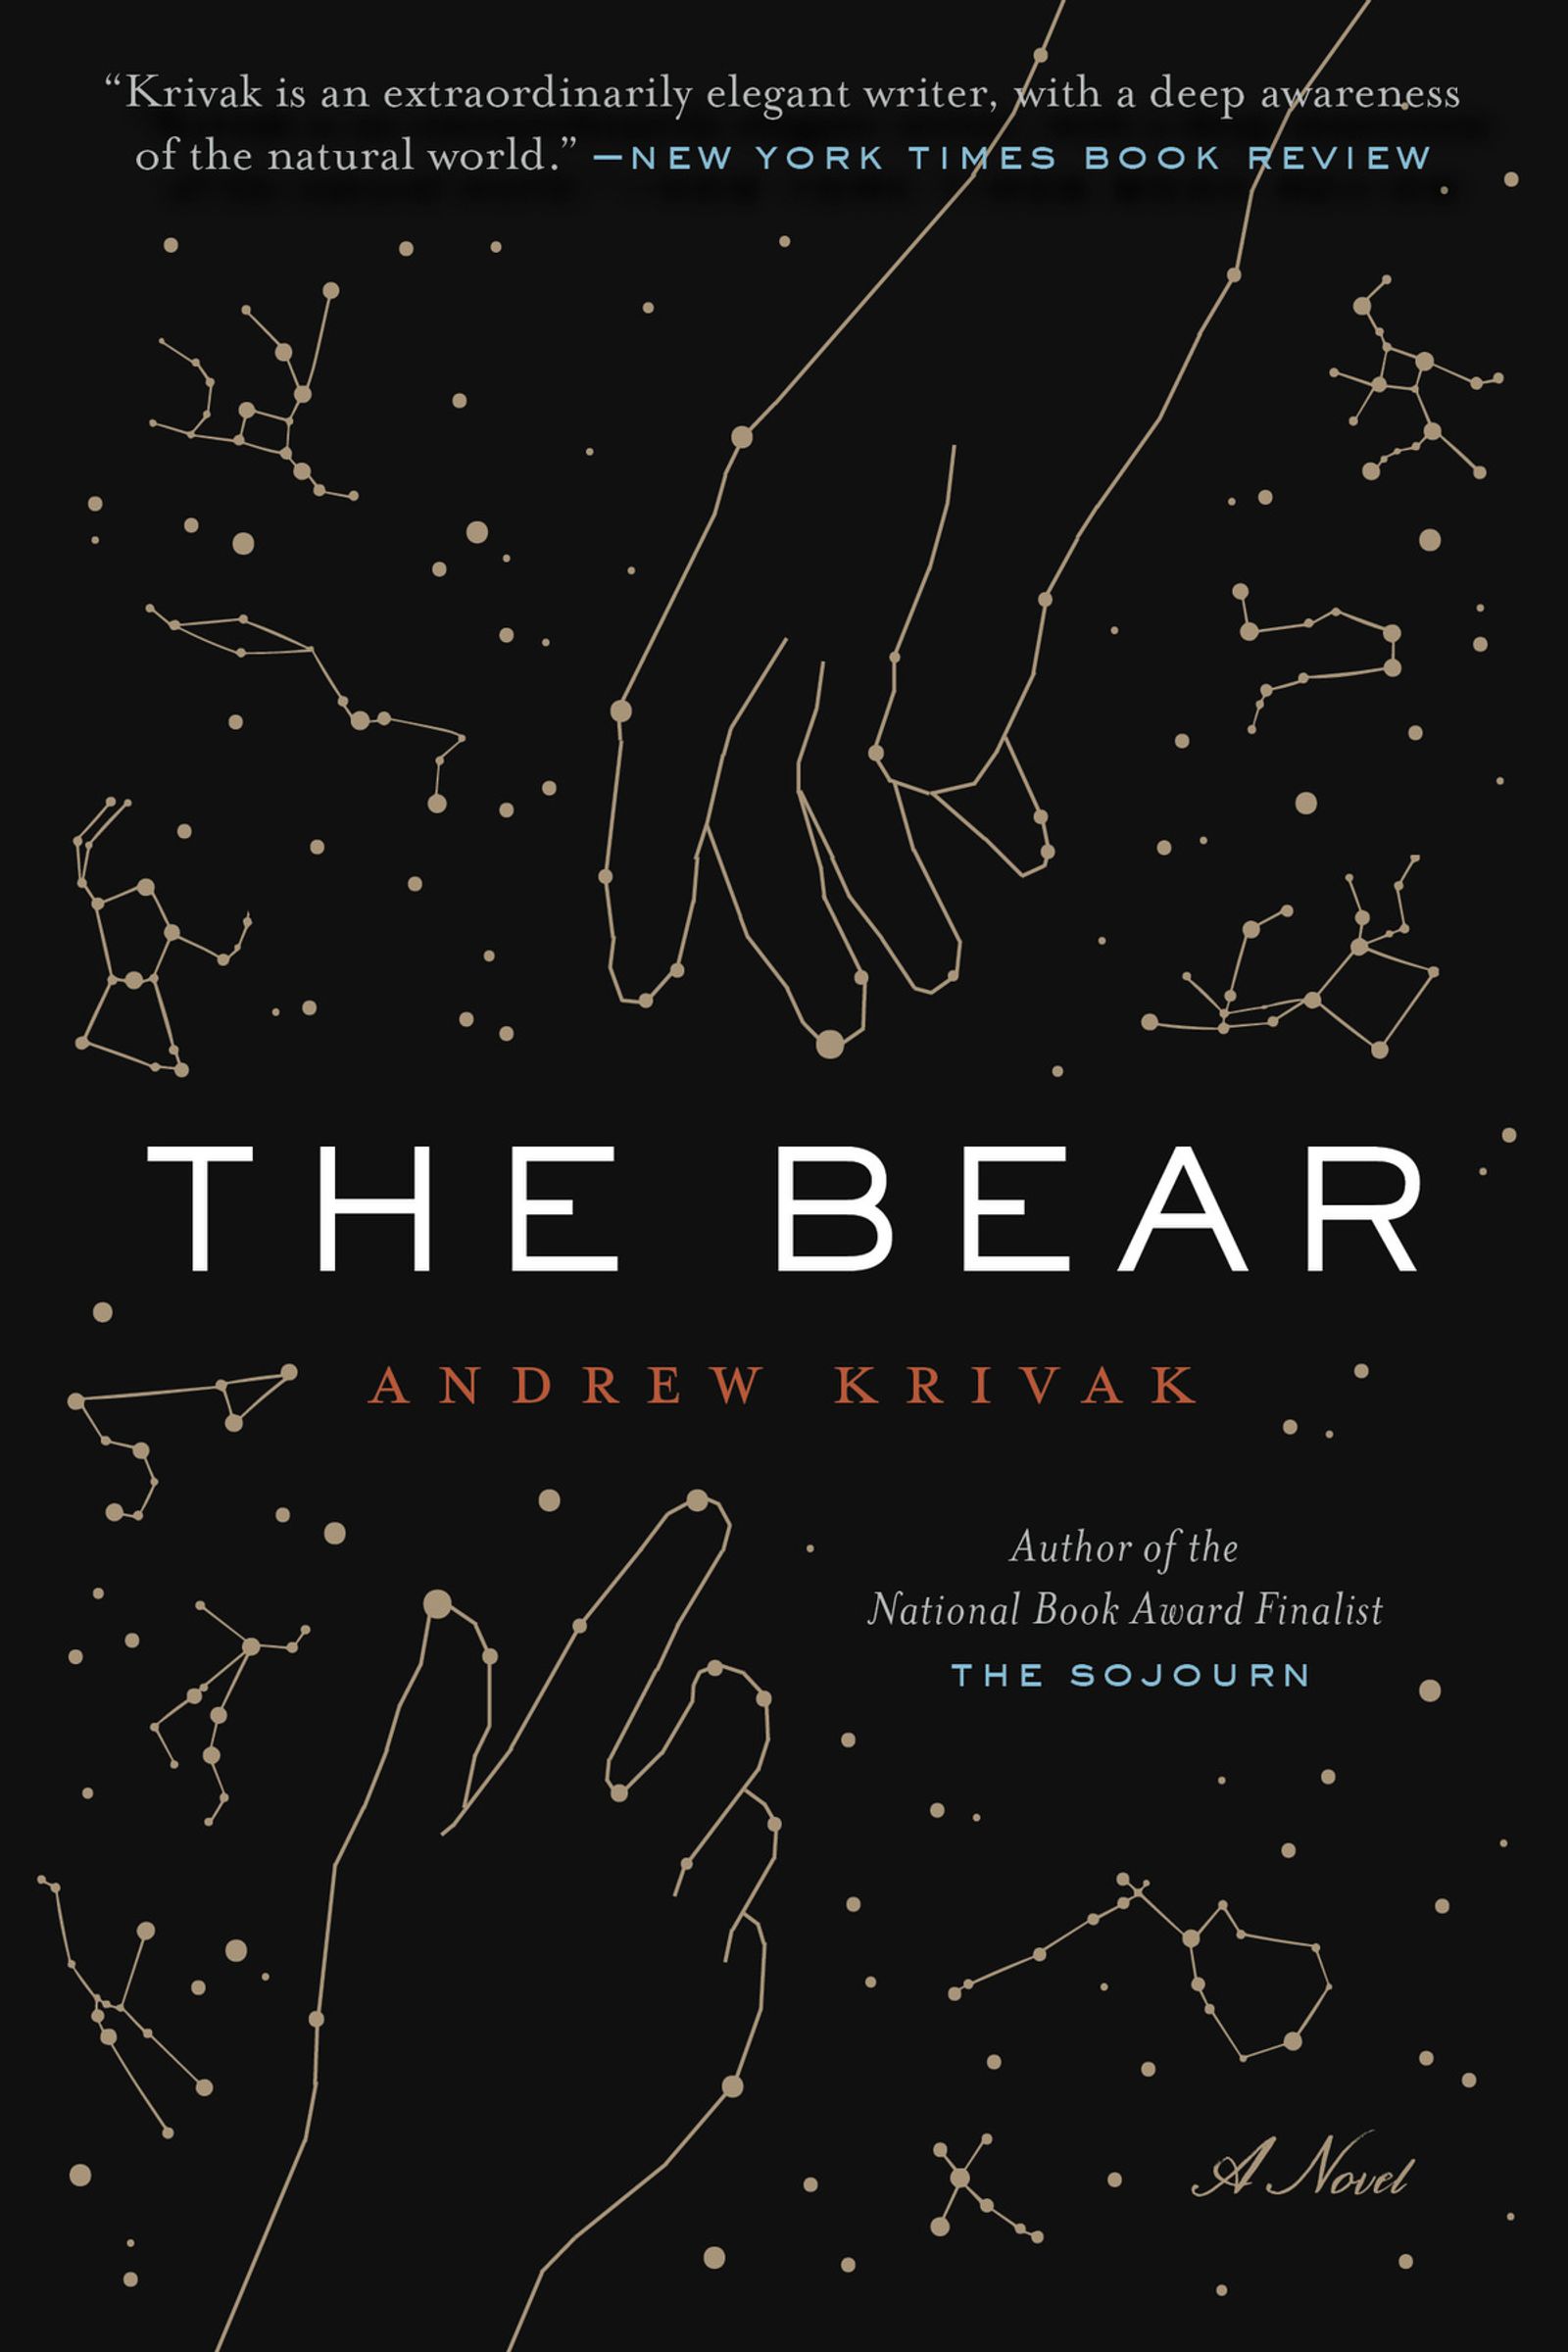 cover image of the book The Bear